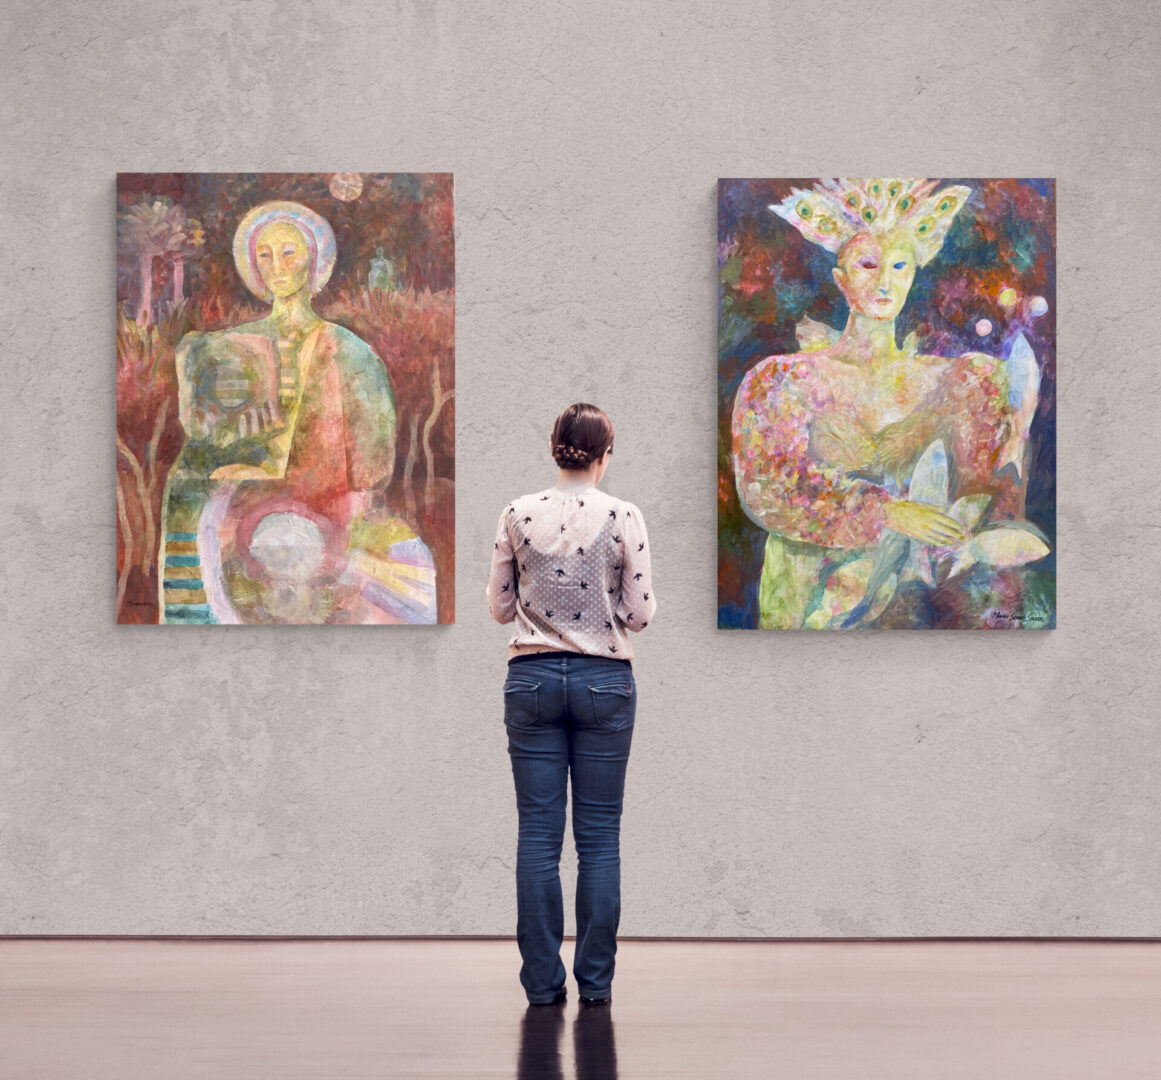 A woman admiring two local fine art paintings for sale in an art gallery.